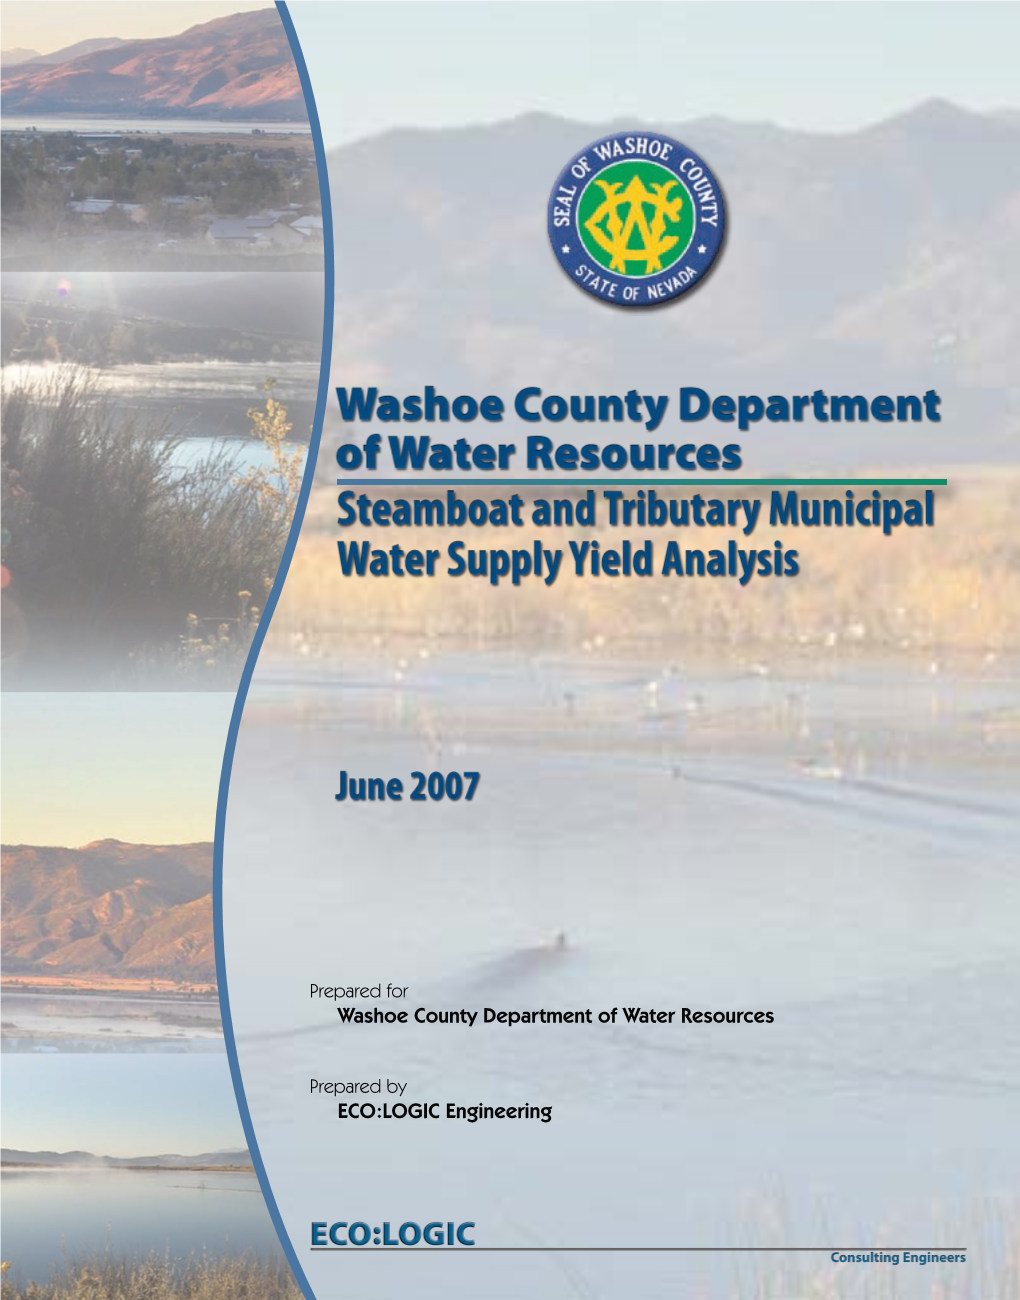 Washoe County Department of Water Resources ECO:LOGIC Engineering